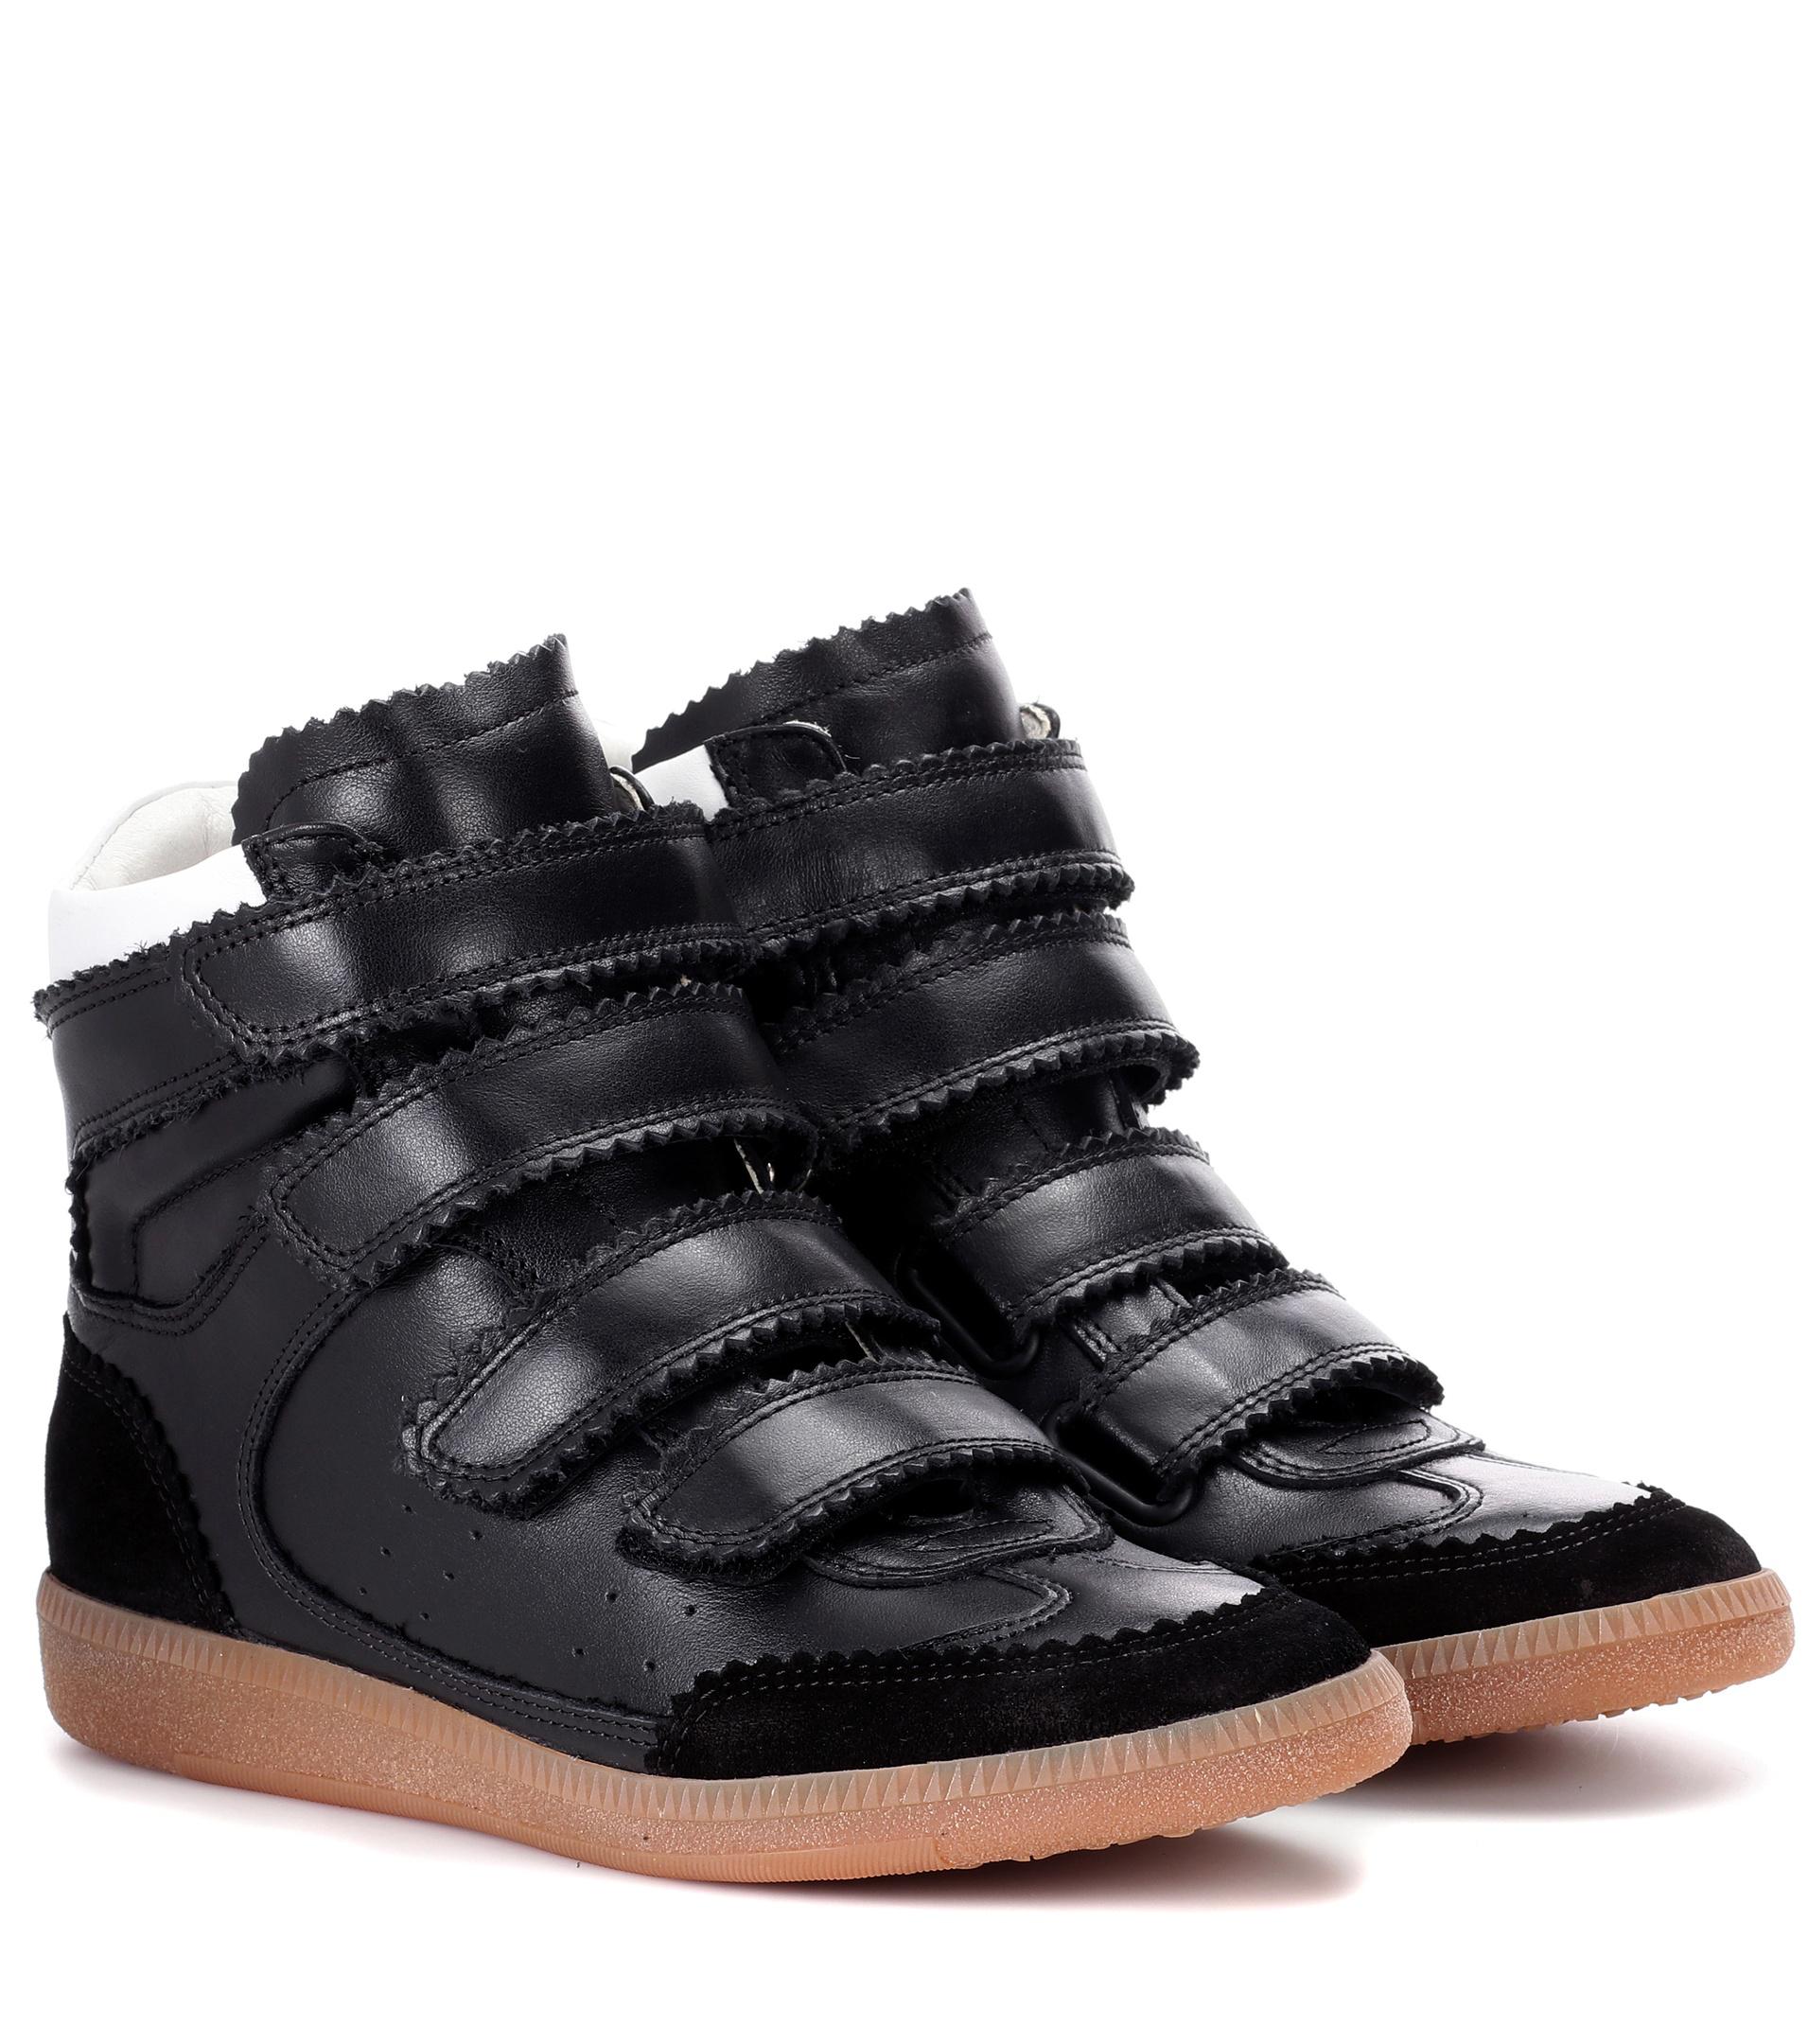 Lyst - Isabel Marant Bilsy Leather Sneakers in Black